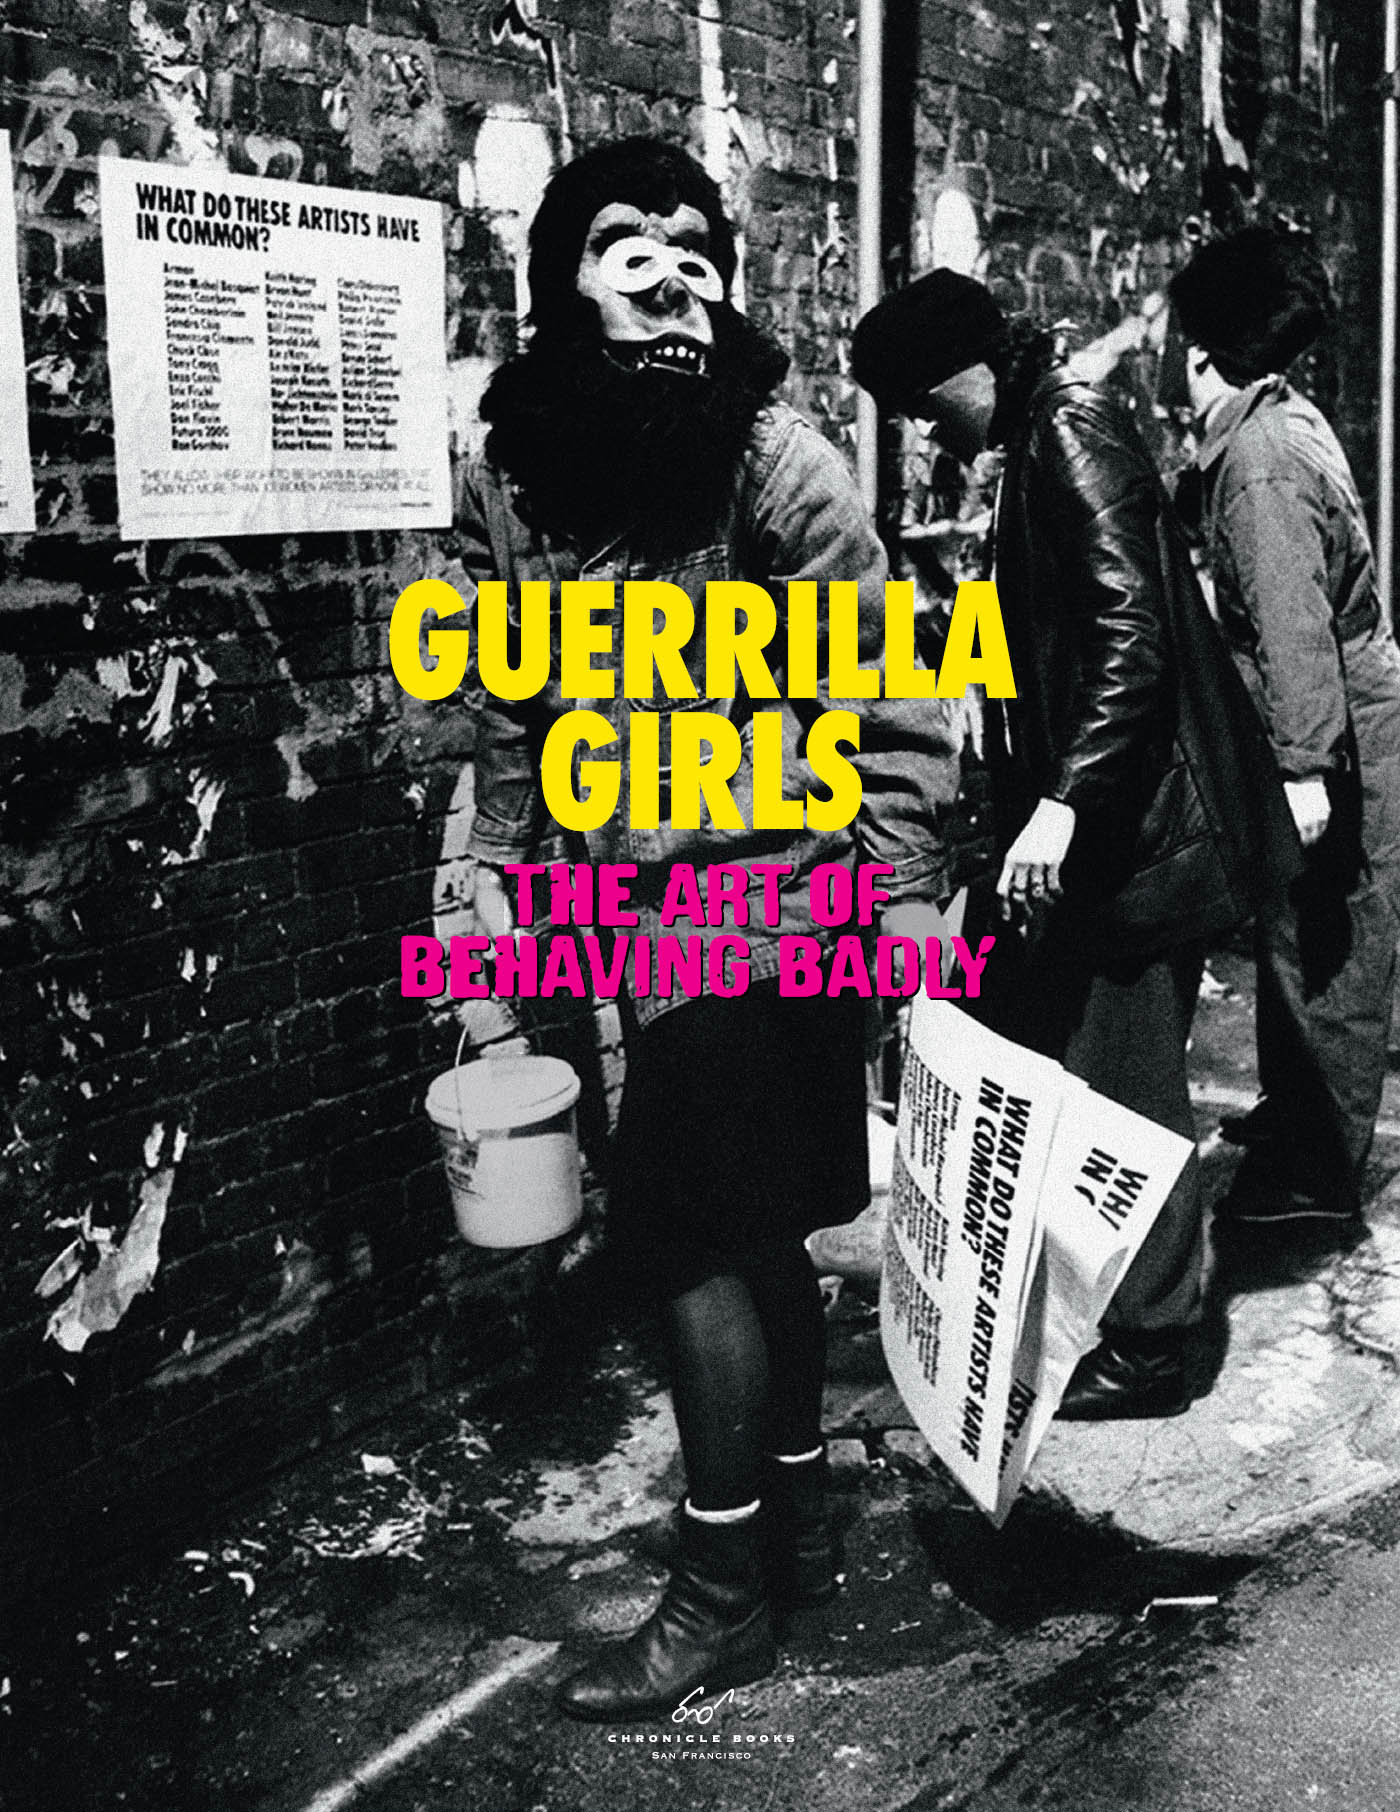 Copyright 2020 by Guerrilla Girls All rights reserved No part of this book - photo 2